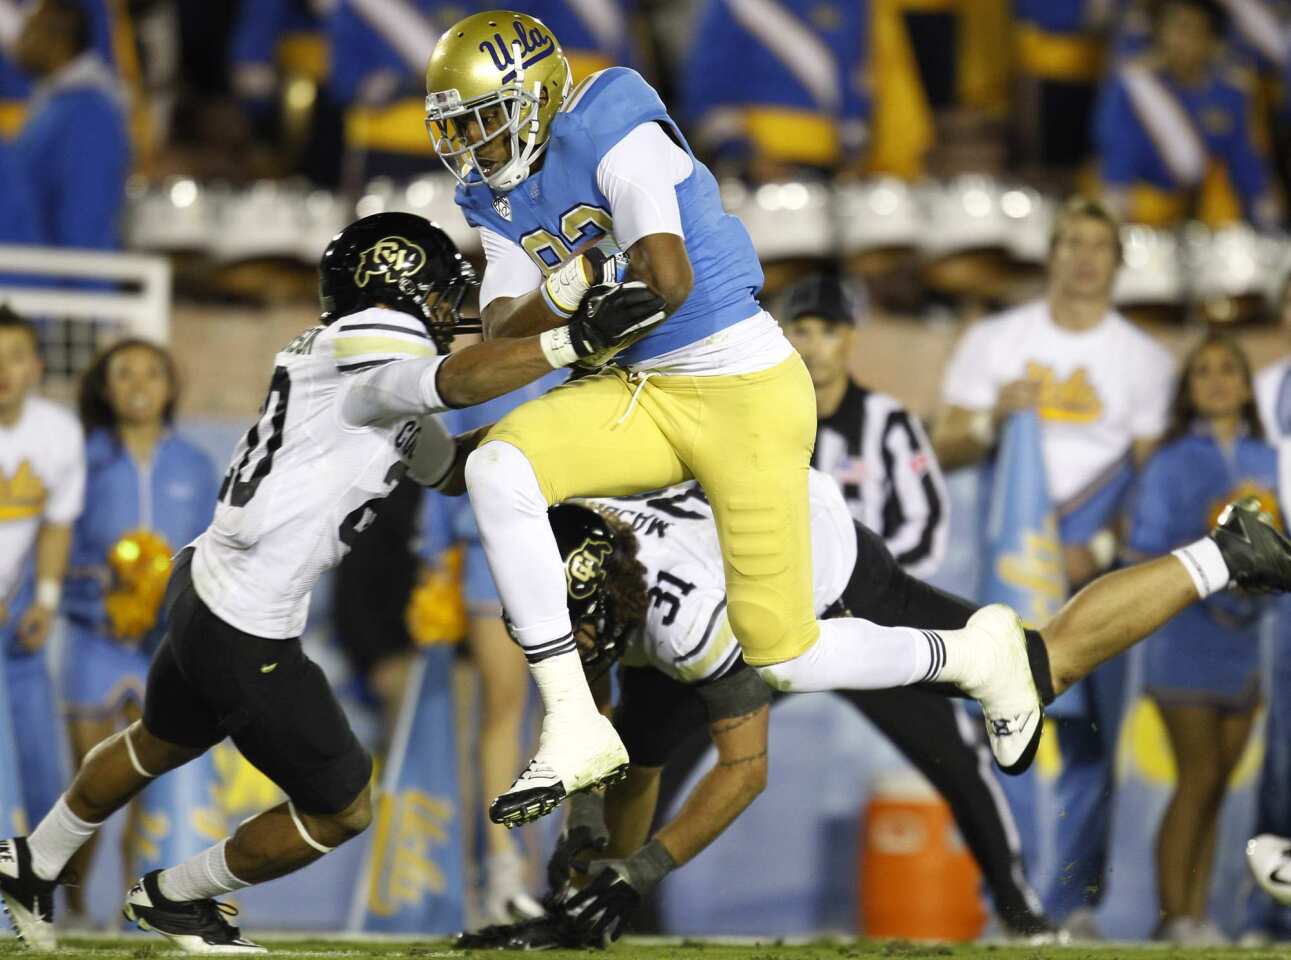 Bruins receiver Nelson Rosario gets past Buffaloes defensive back Greg Henderson for a touchdown in the second half Saturday at the Rose Bowl.